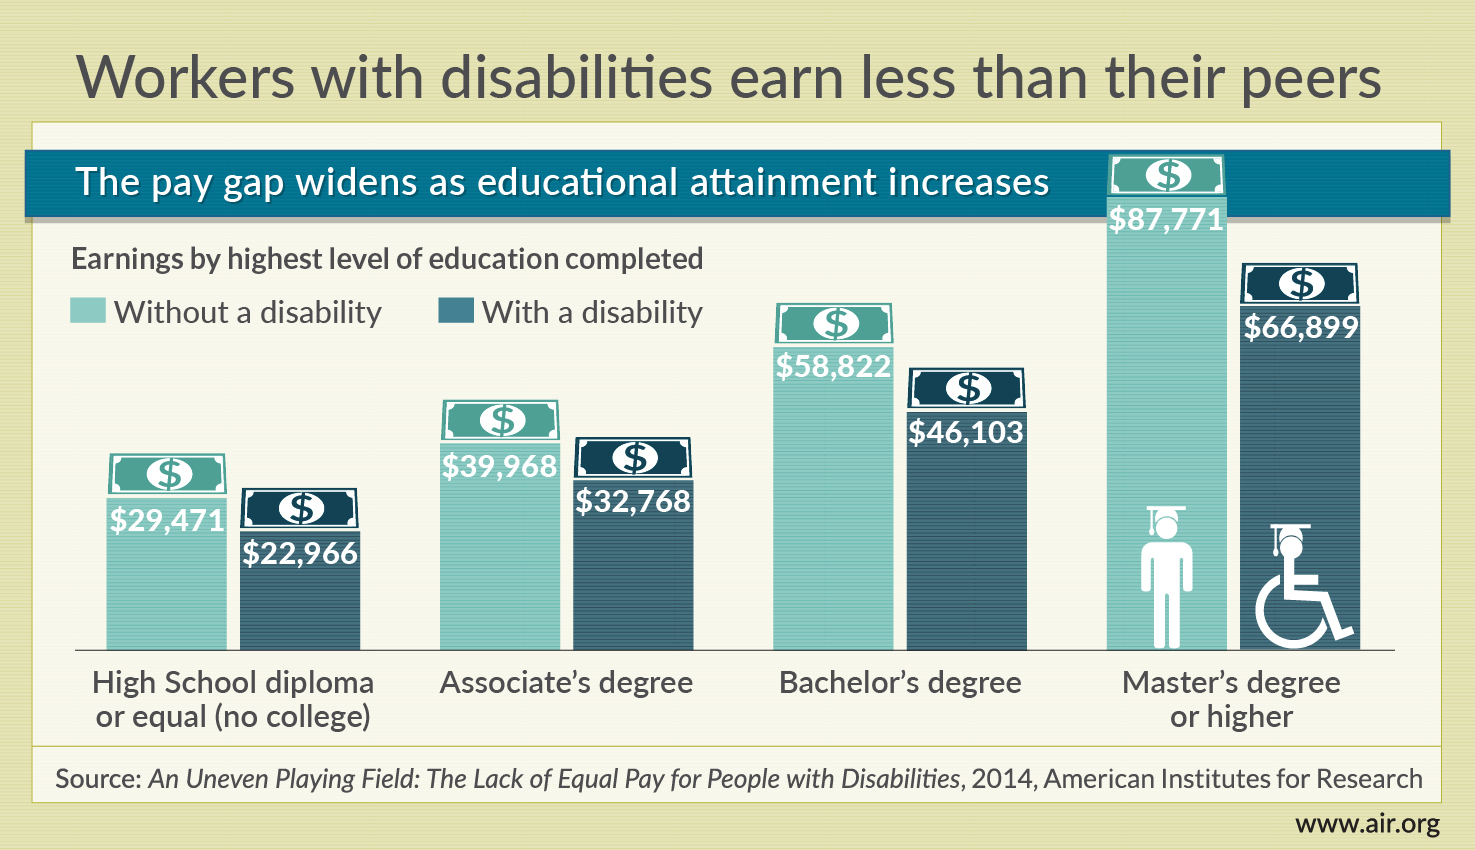 People with disabilities earn less than their peers. Infographic compares pay disparity by education level